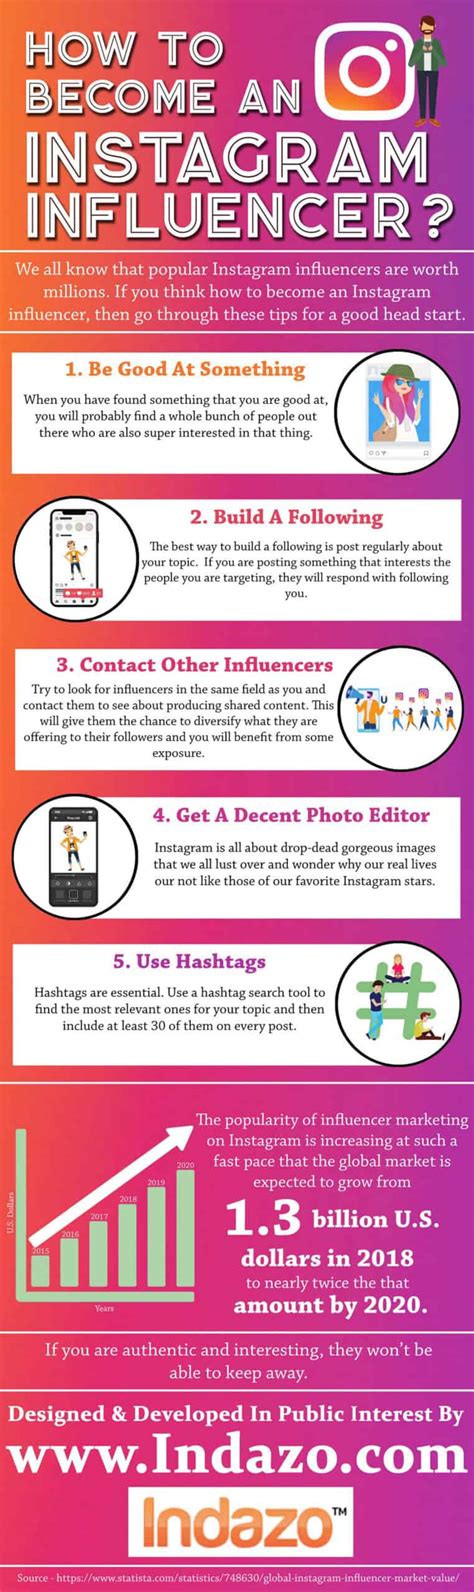 How to become an instagram influencer. Step 3: Stay up to date with Instagram features and algorithm. The most effective way to separate an influencer from others is to focus on updated Instagram features and algorithms. Consistent learning can make you a valuable influencer to rapidly grow your Instagram page to create a winning strategy and beat competitors. 